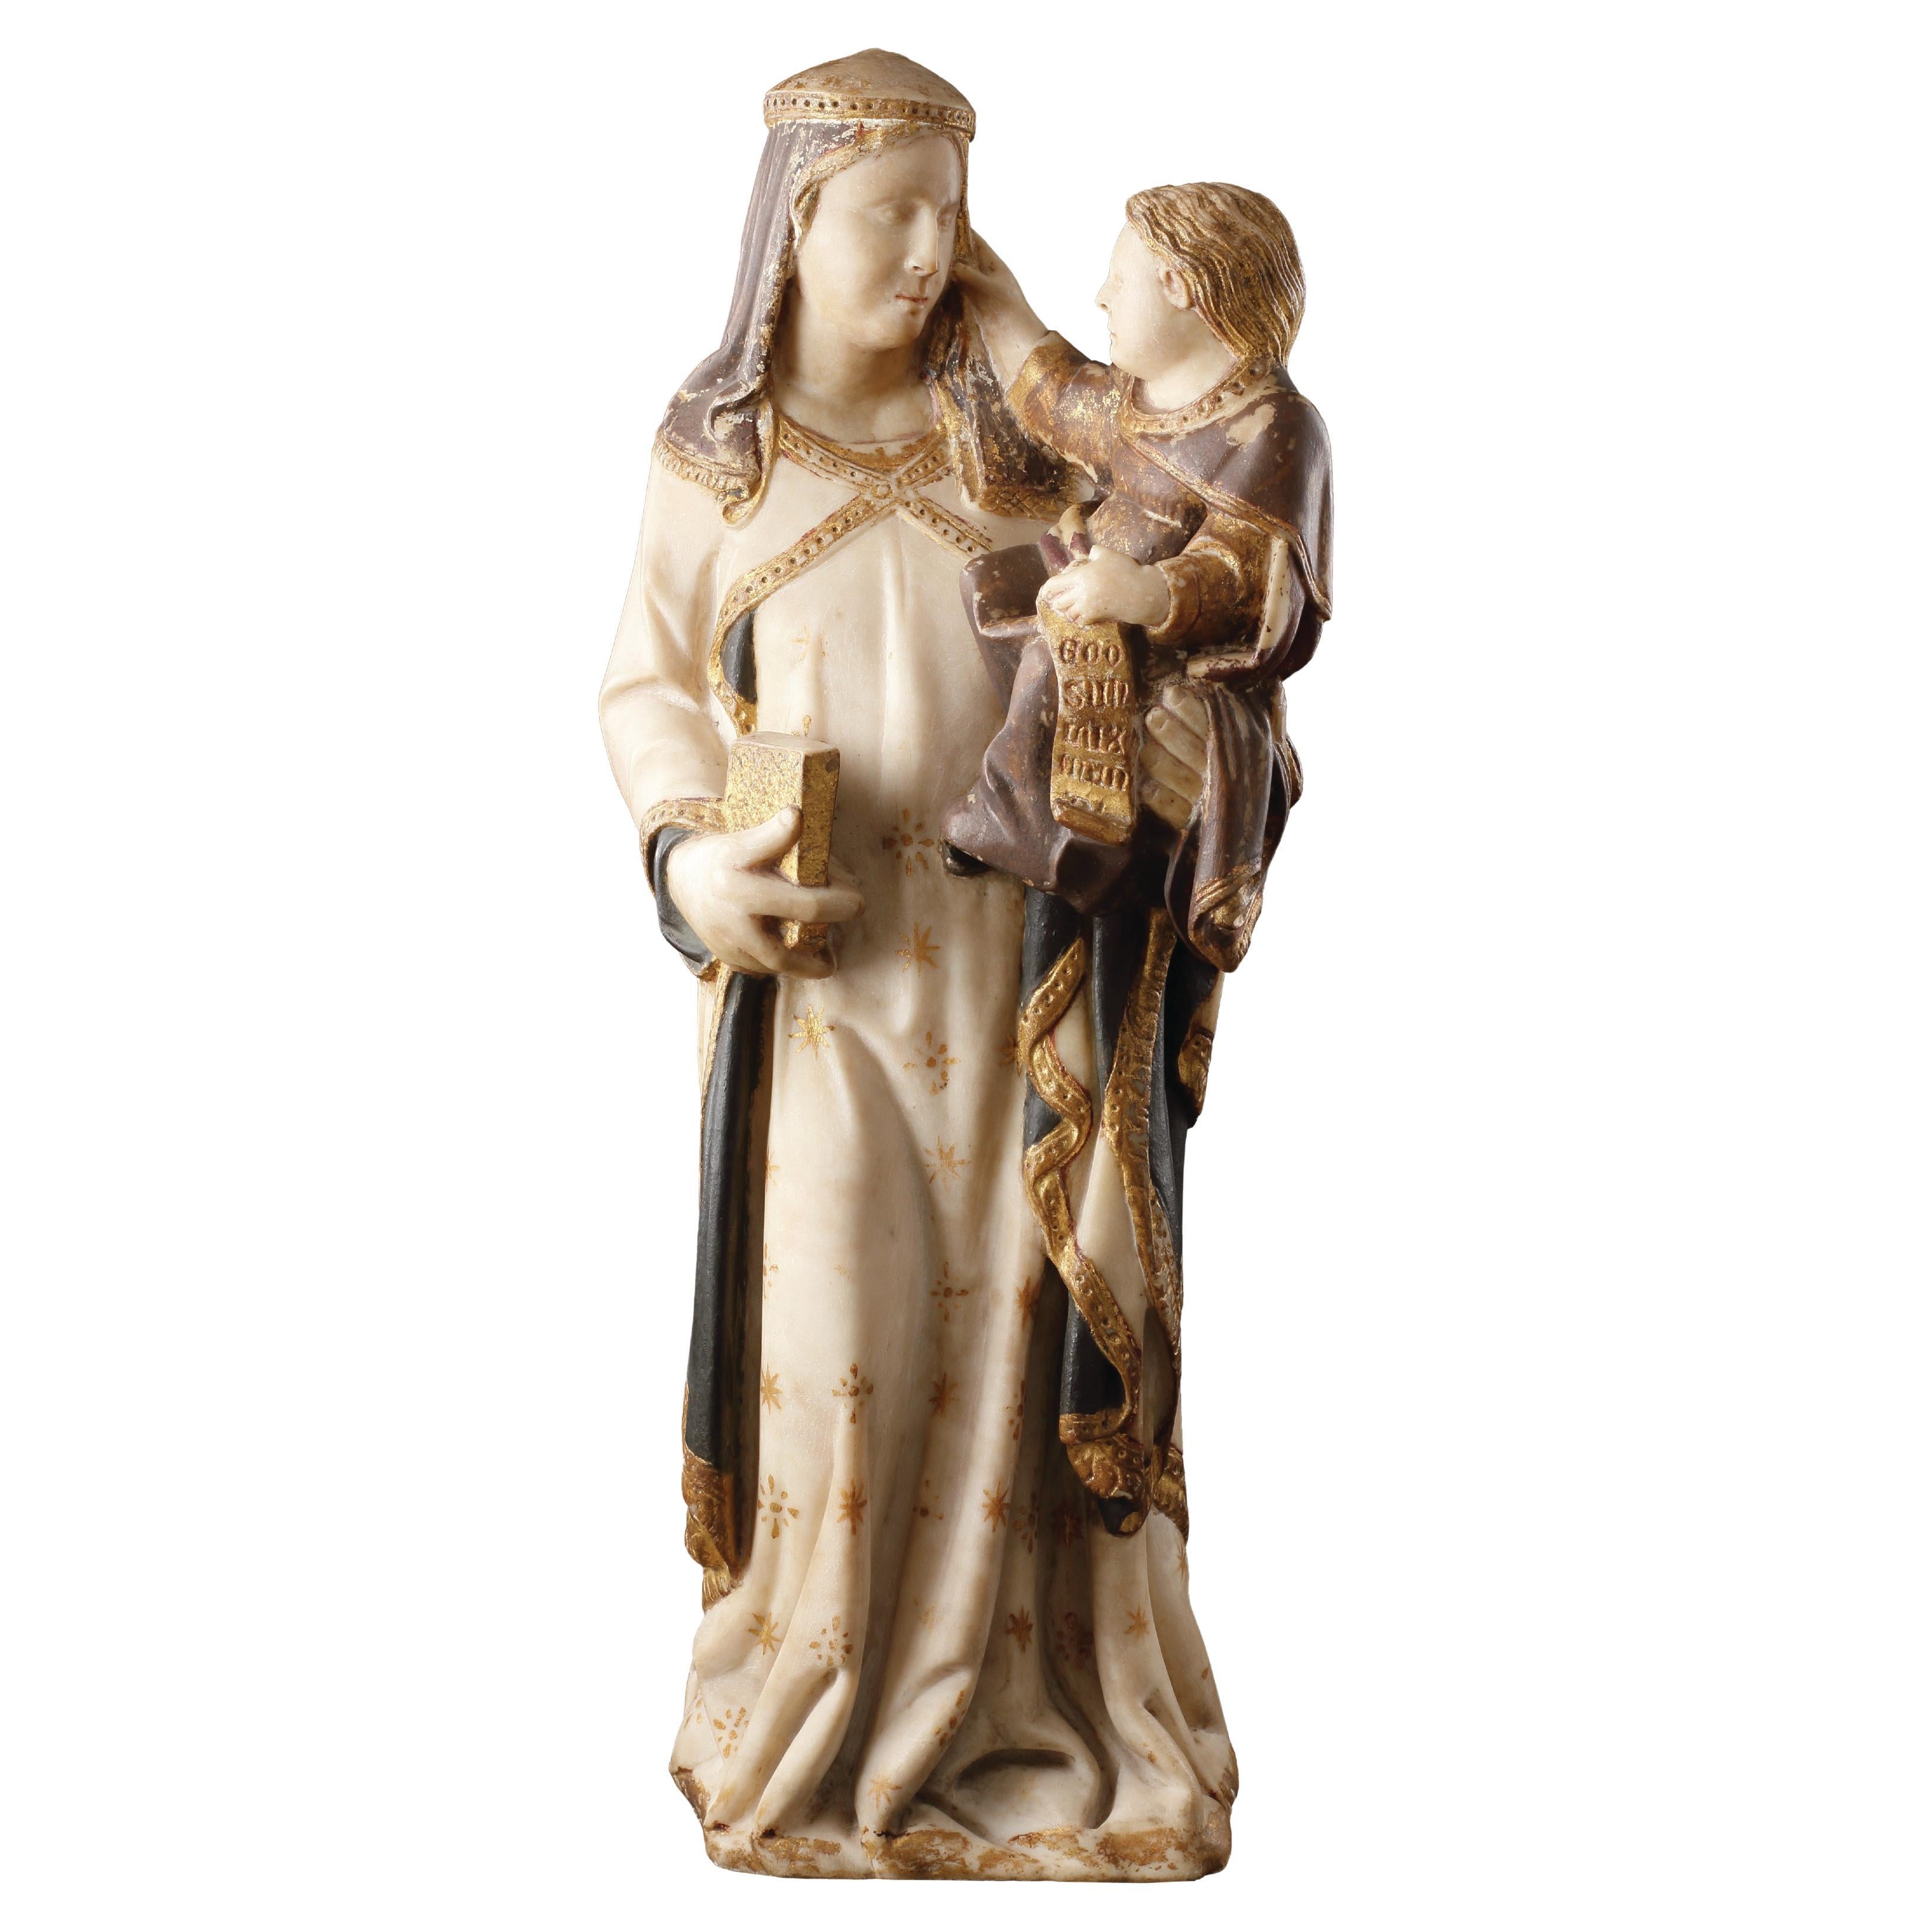 A Polychrome and Parcel-Gilt Marble Group of the Virgin and Child